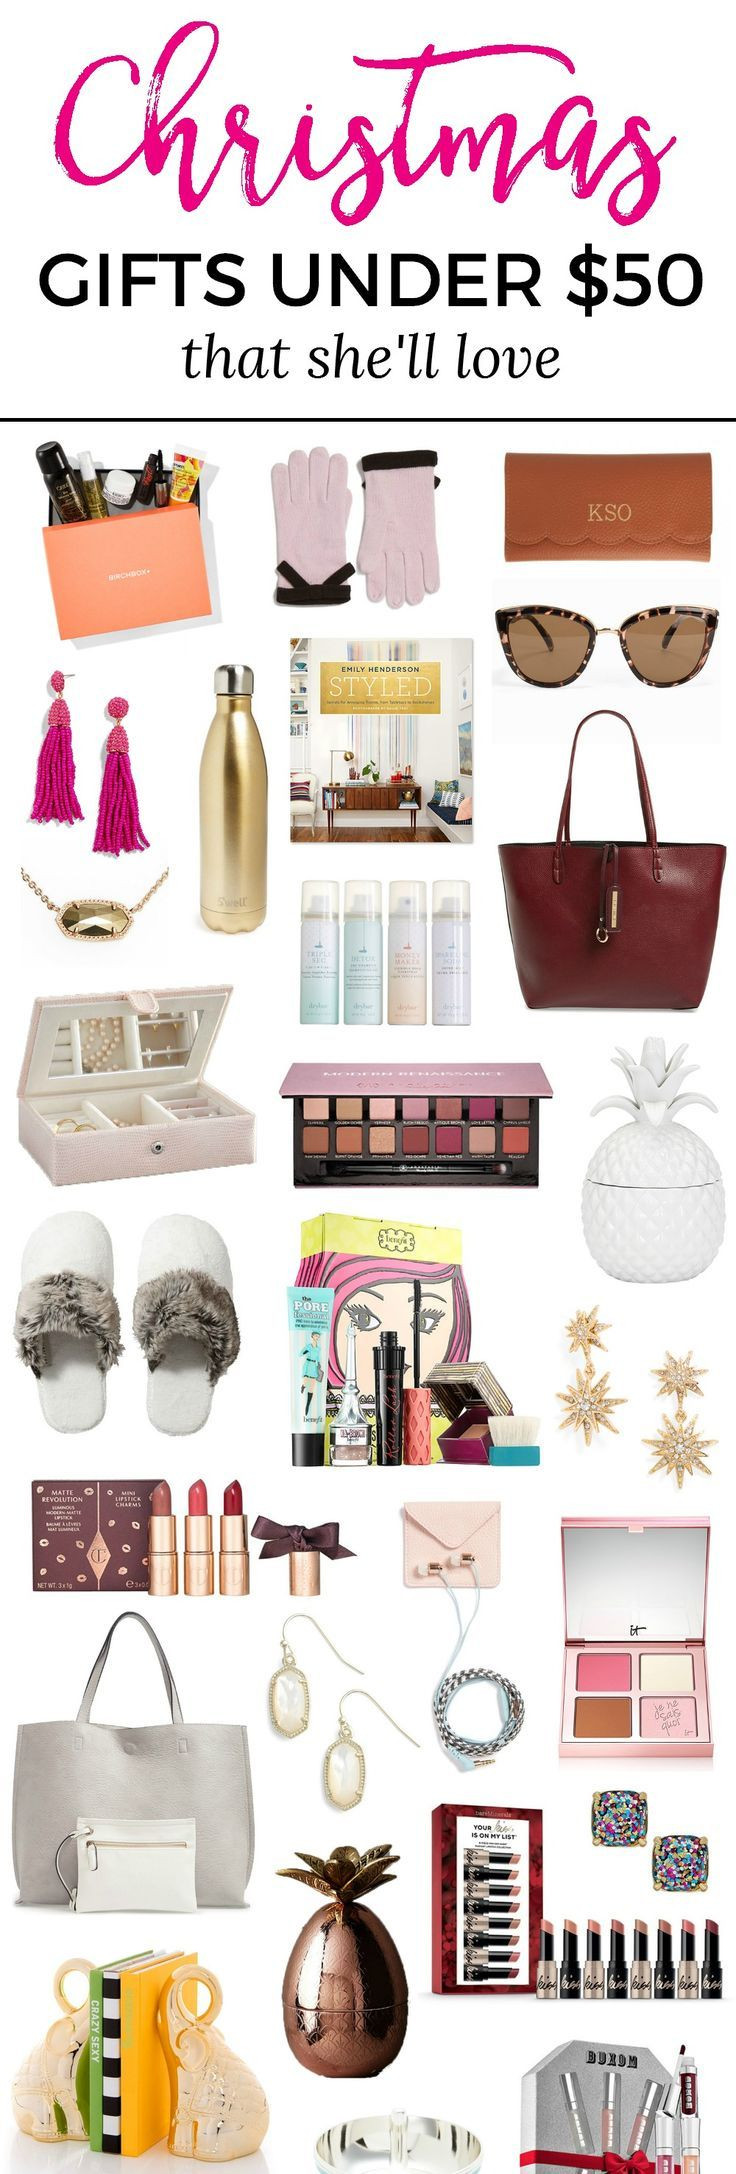 Female Birthday Gift Ideas
 The best Christmas t ideas for women under $50 You won